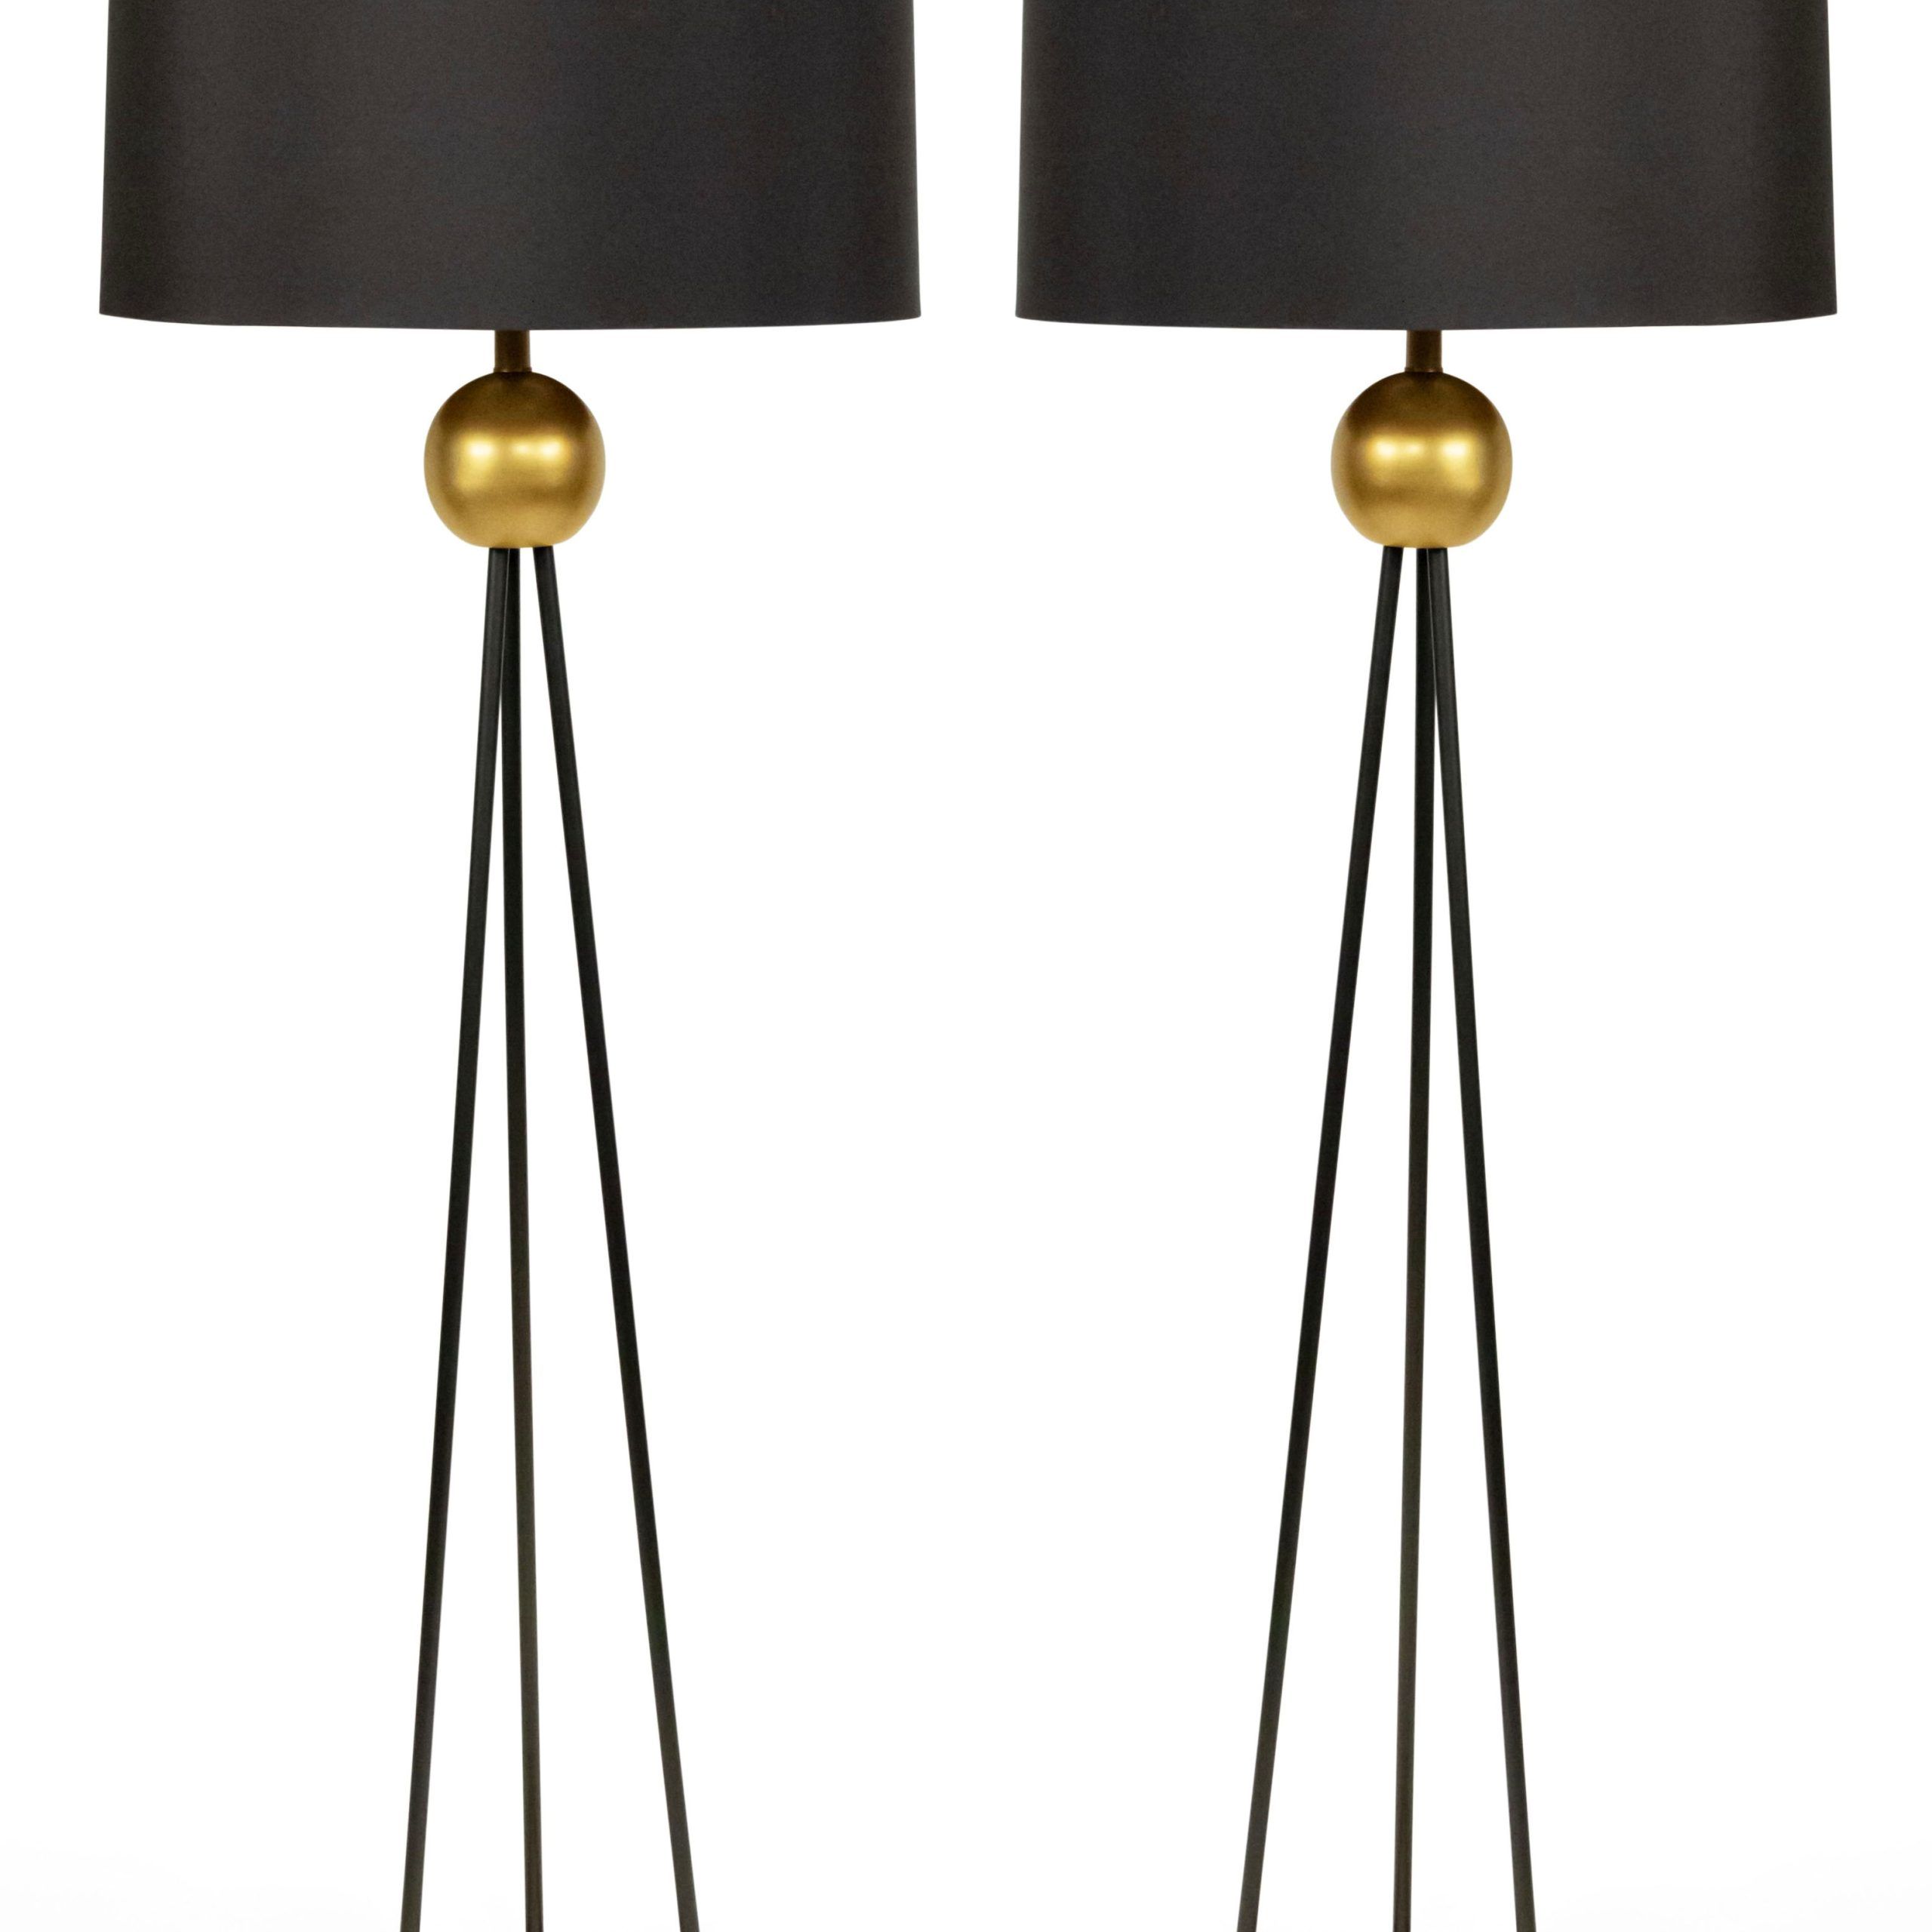 Pair Contemporary Black And Gold Metal Floor Lamps 1 With Regard To Black Metal Floor Lamps (View 12 of 20)